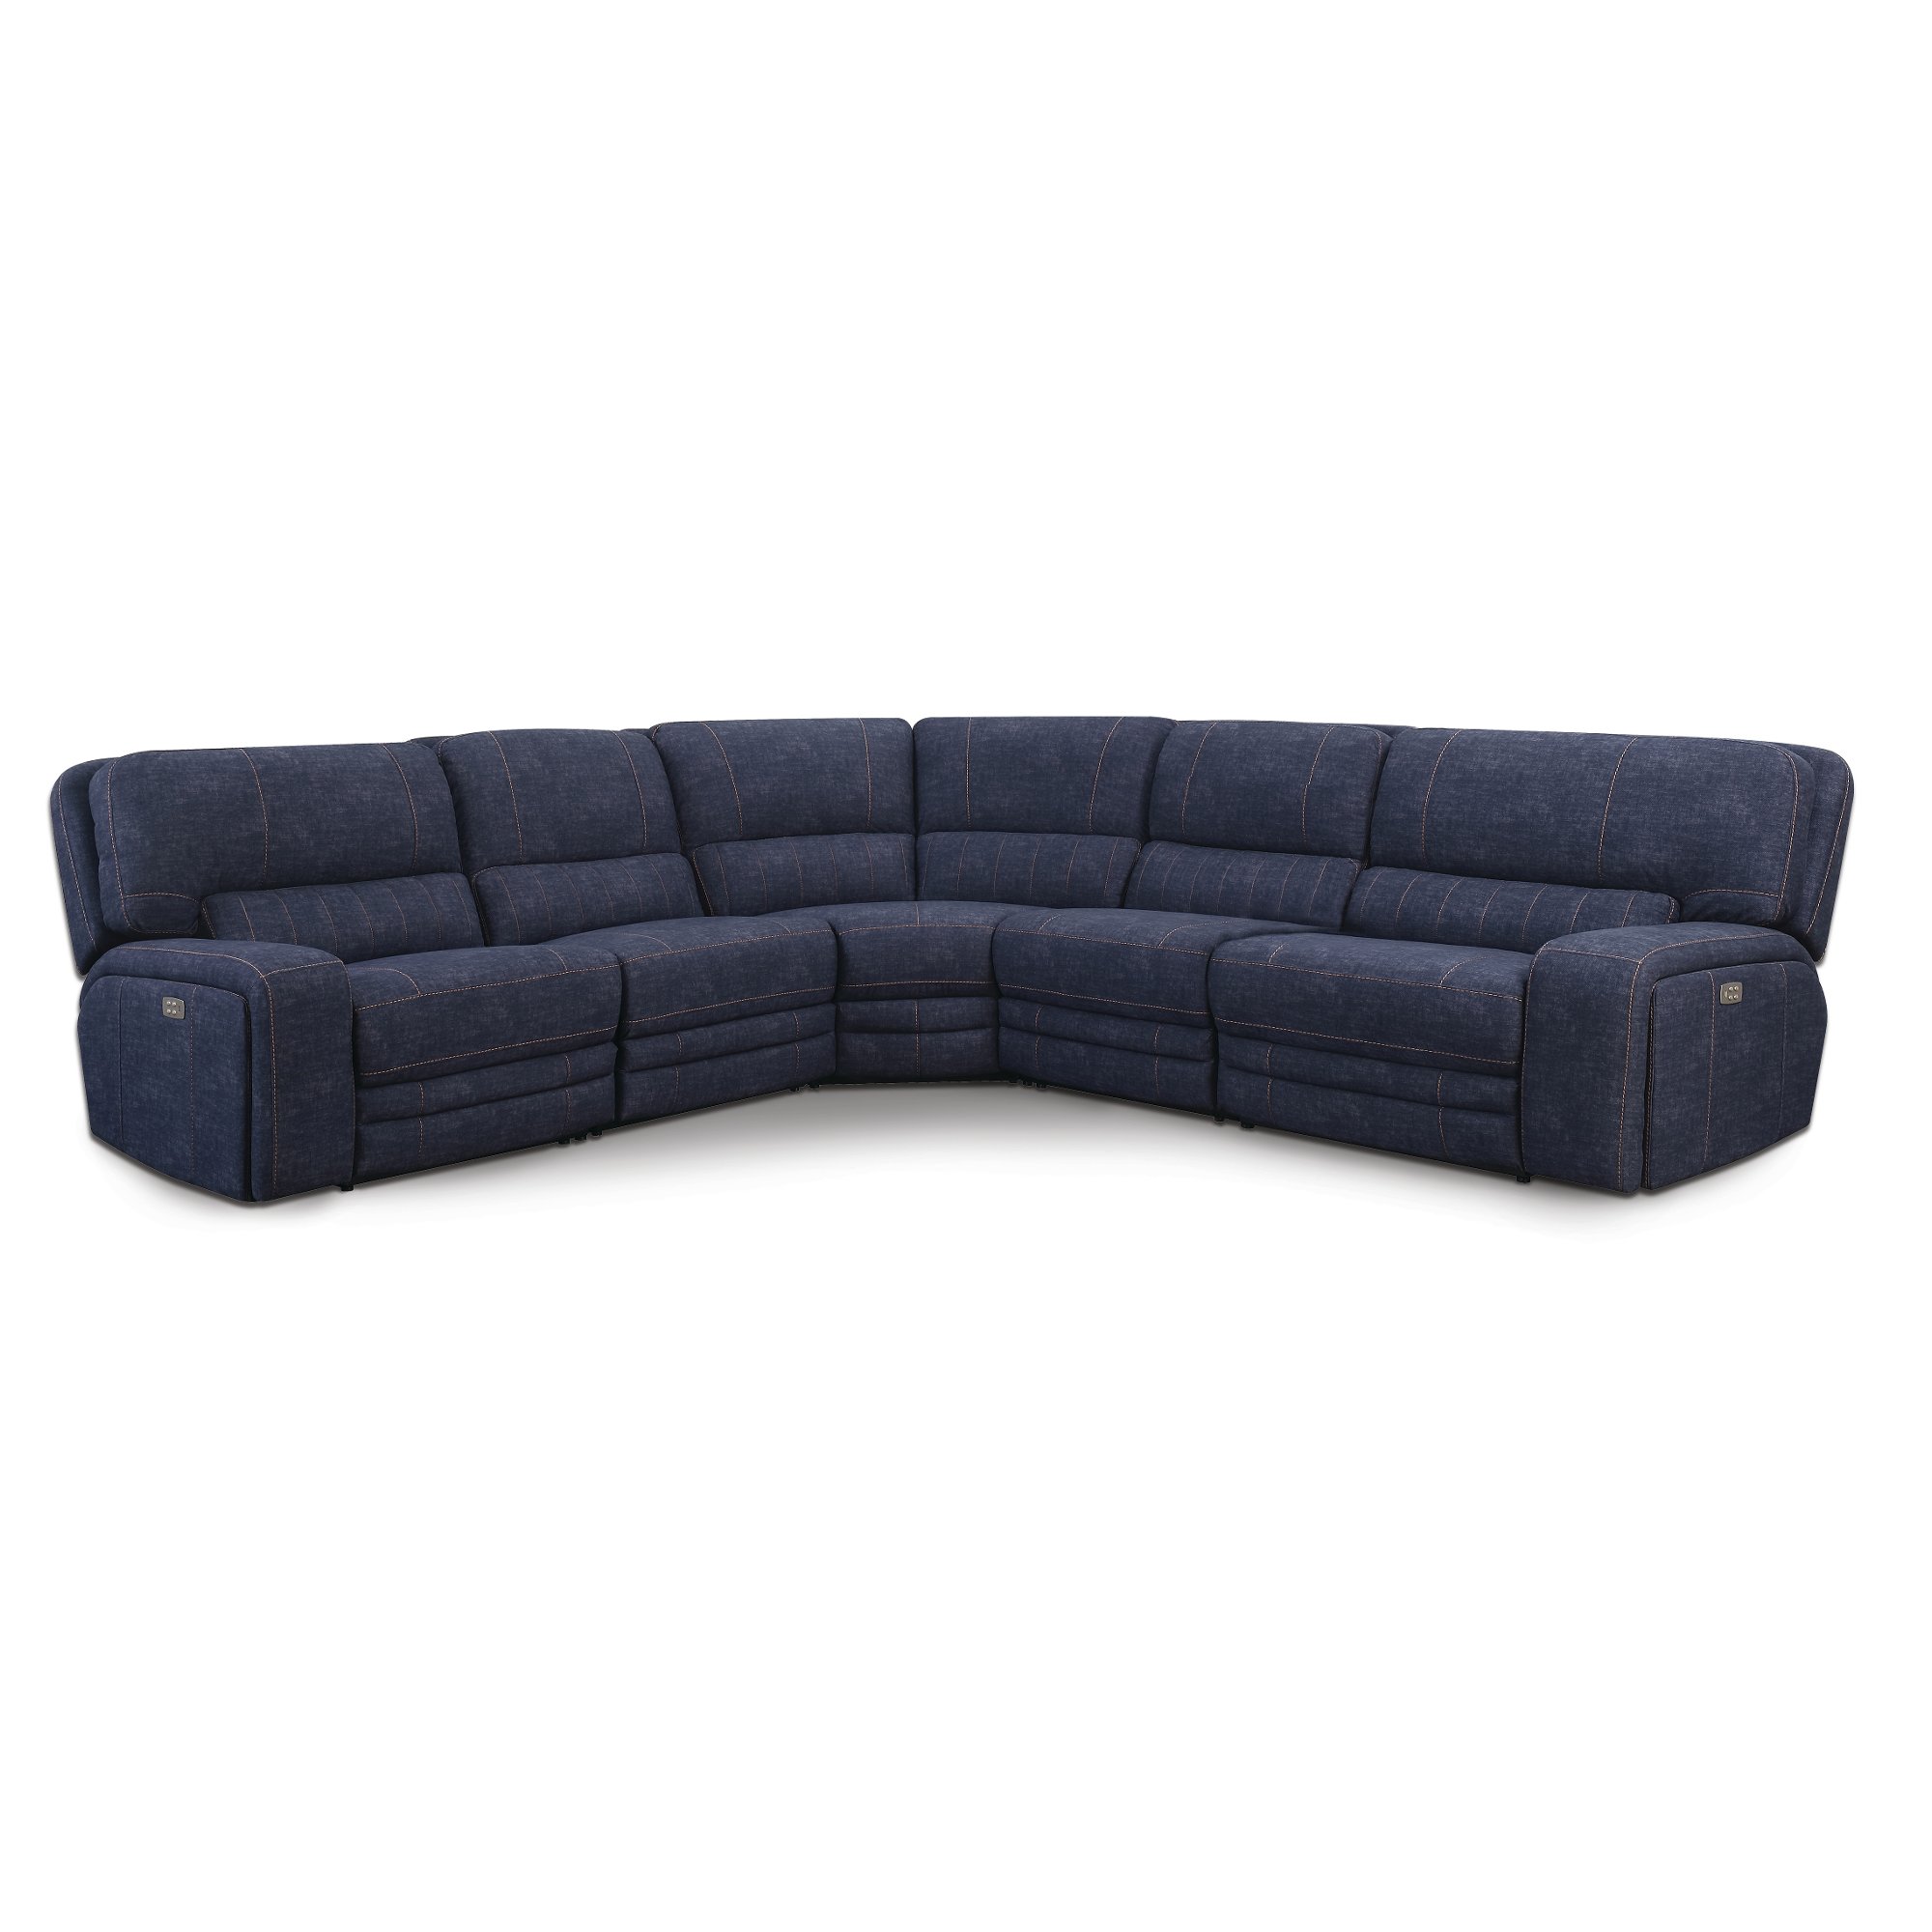 indigo blue piece reclining sectional sofa rock quarry rcwilley accent table willey furniture garden fine edmonton jules small black corner dewalt leather dining room chairs cute